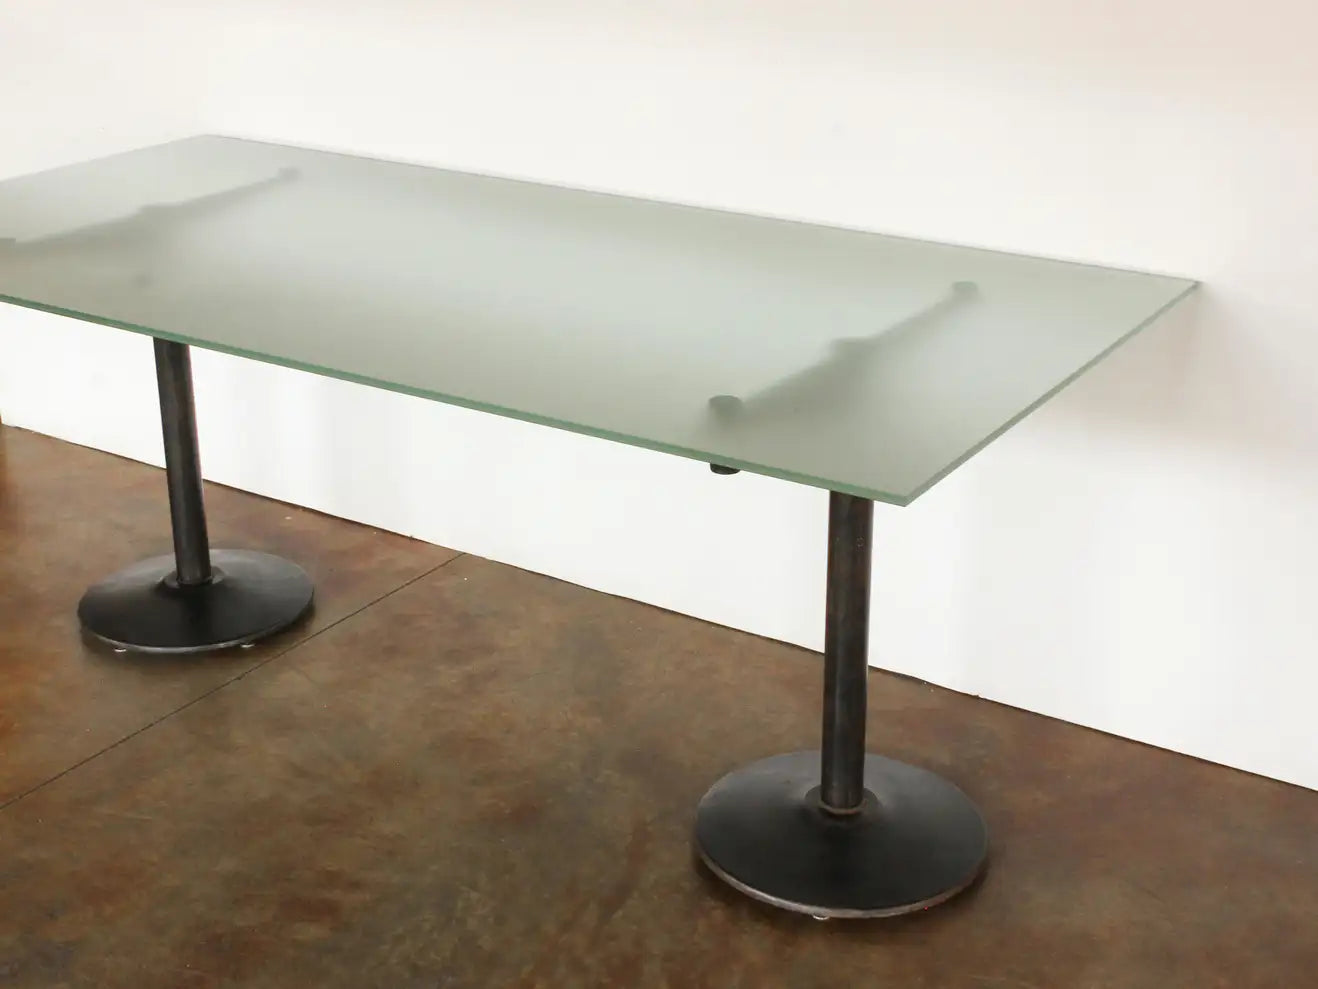 20th c. American Industrial Style Iron Pedestal Table with Frosted Glass Top